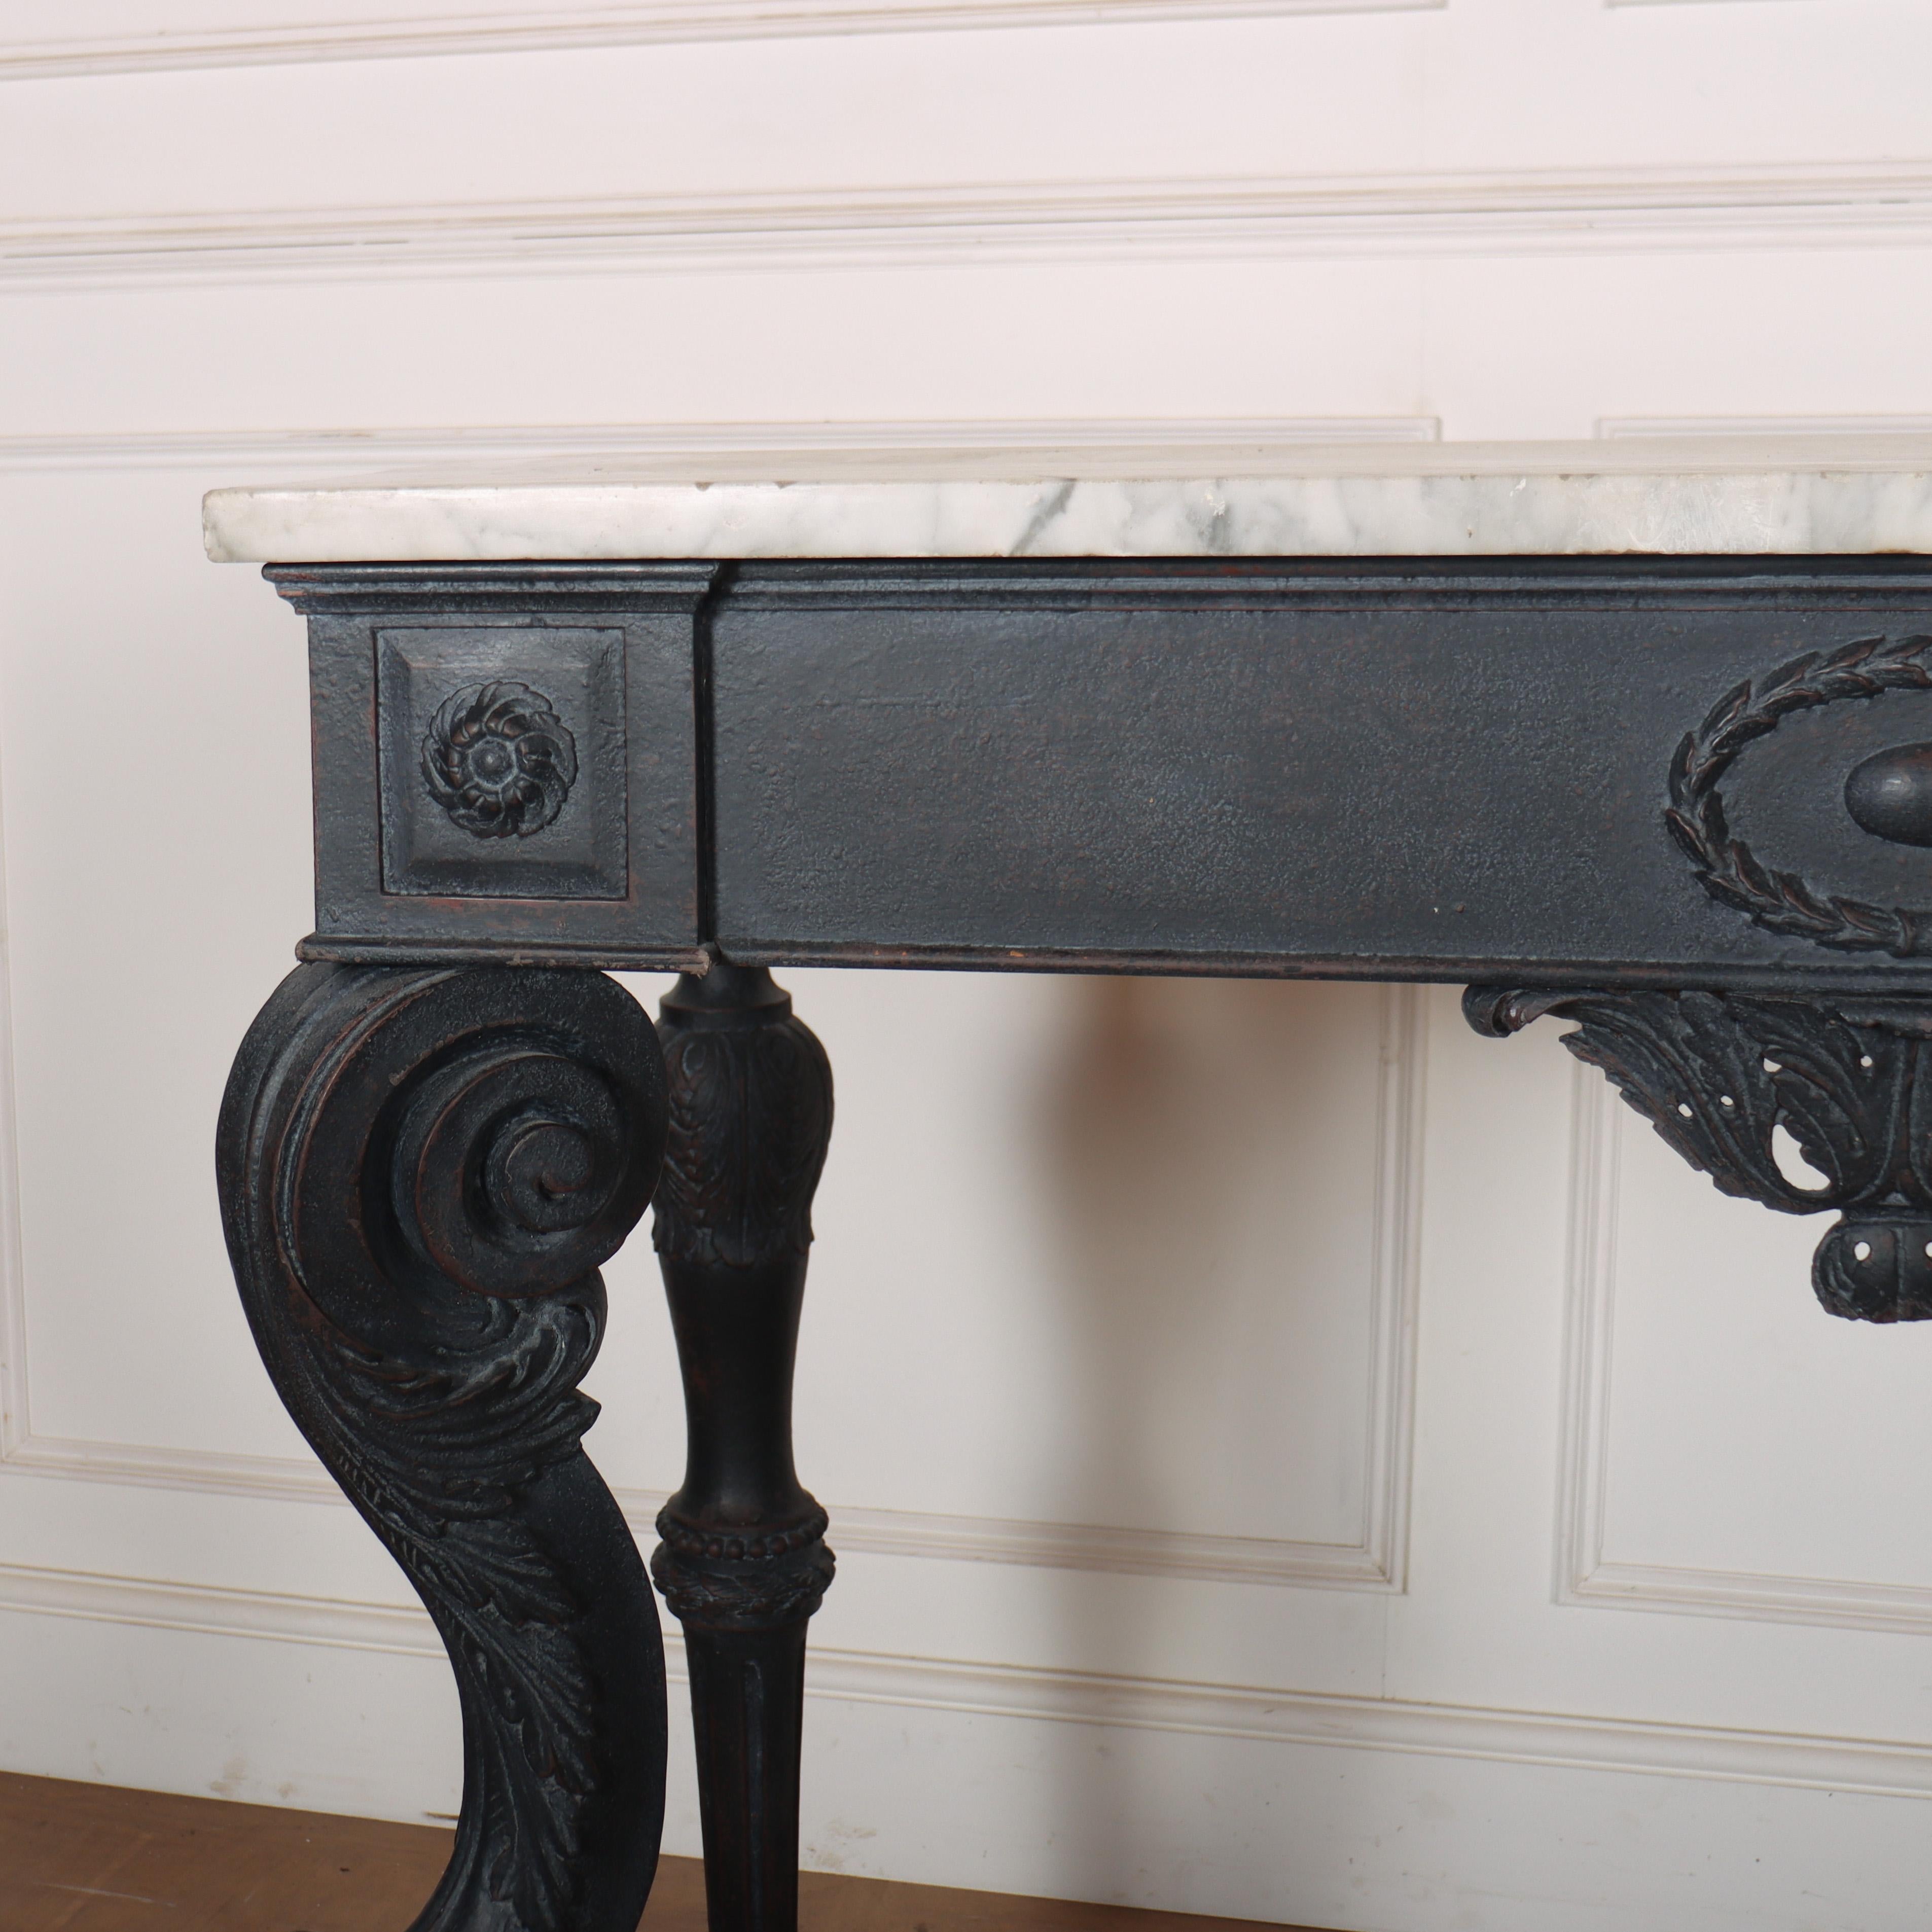 Fabulous early 19th C Italian console table with a later paint finish and a thick marble top. 1830.

Reference: 8325

Dimensions
47 inches (119 cms) Wide
23 inches (58 cms) Deep
41 inches (104 cms) High